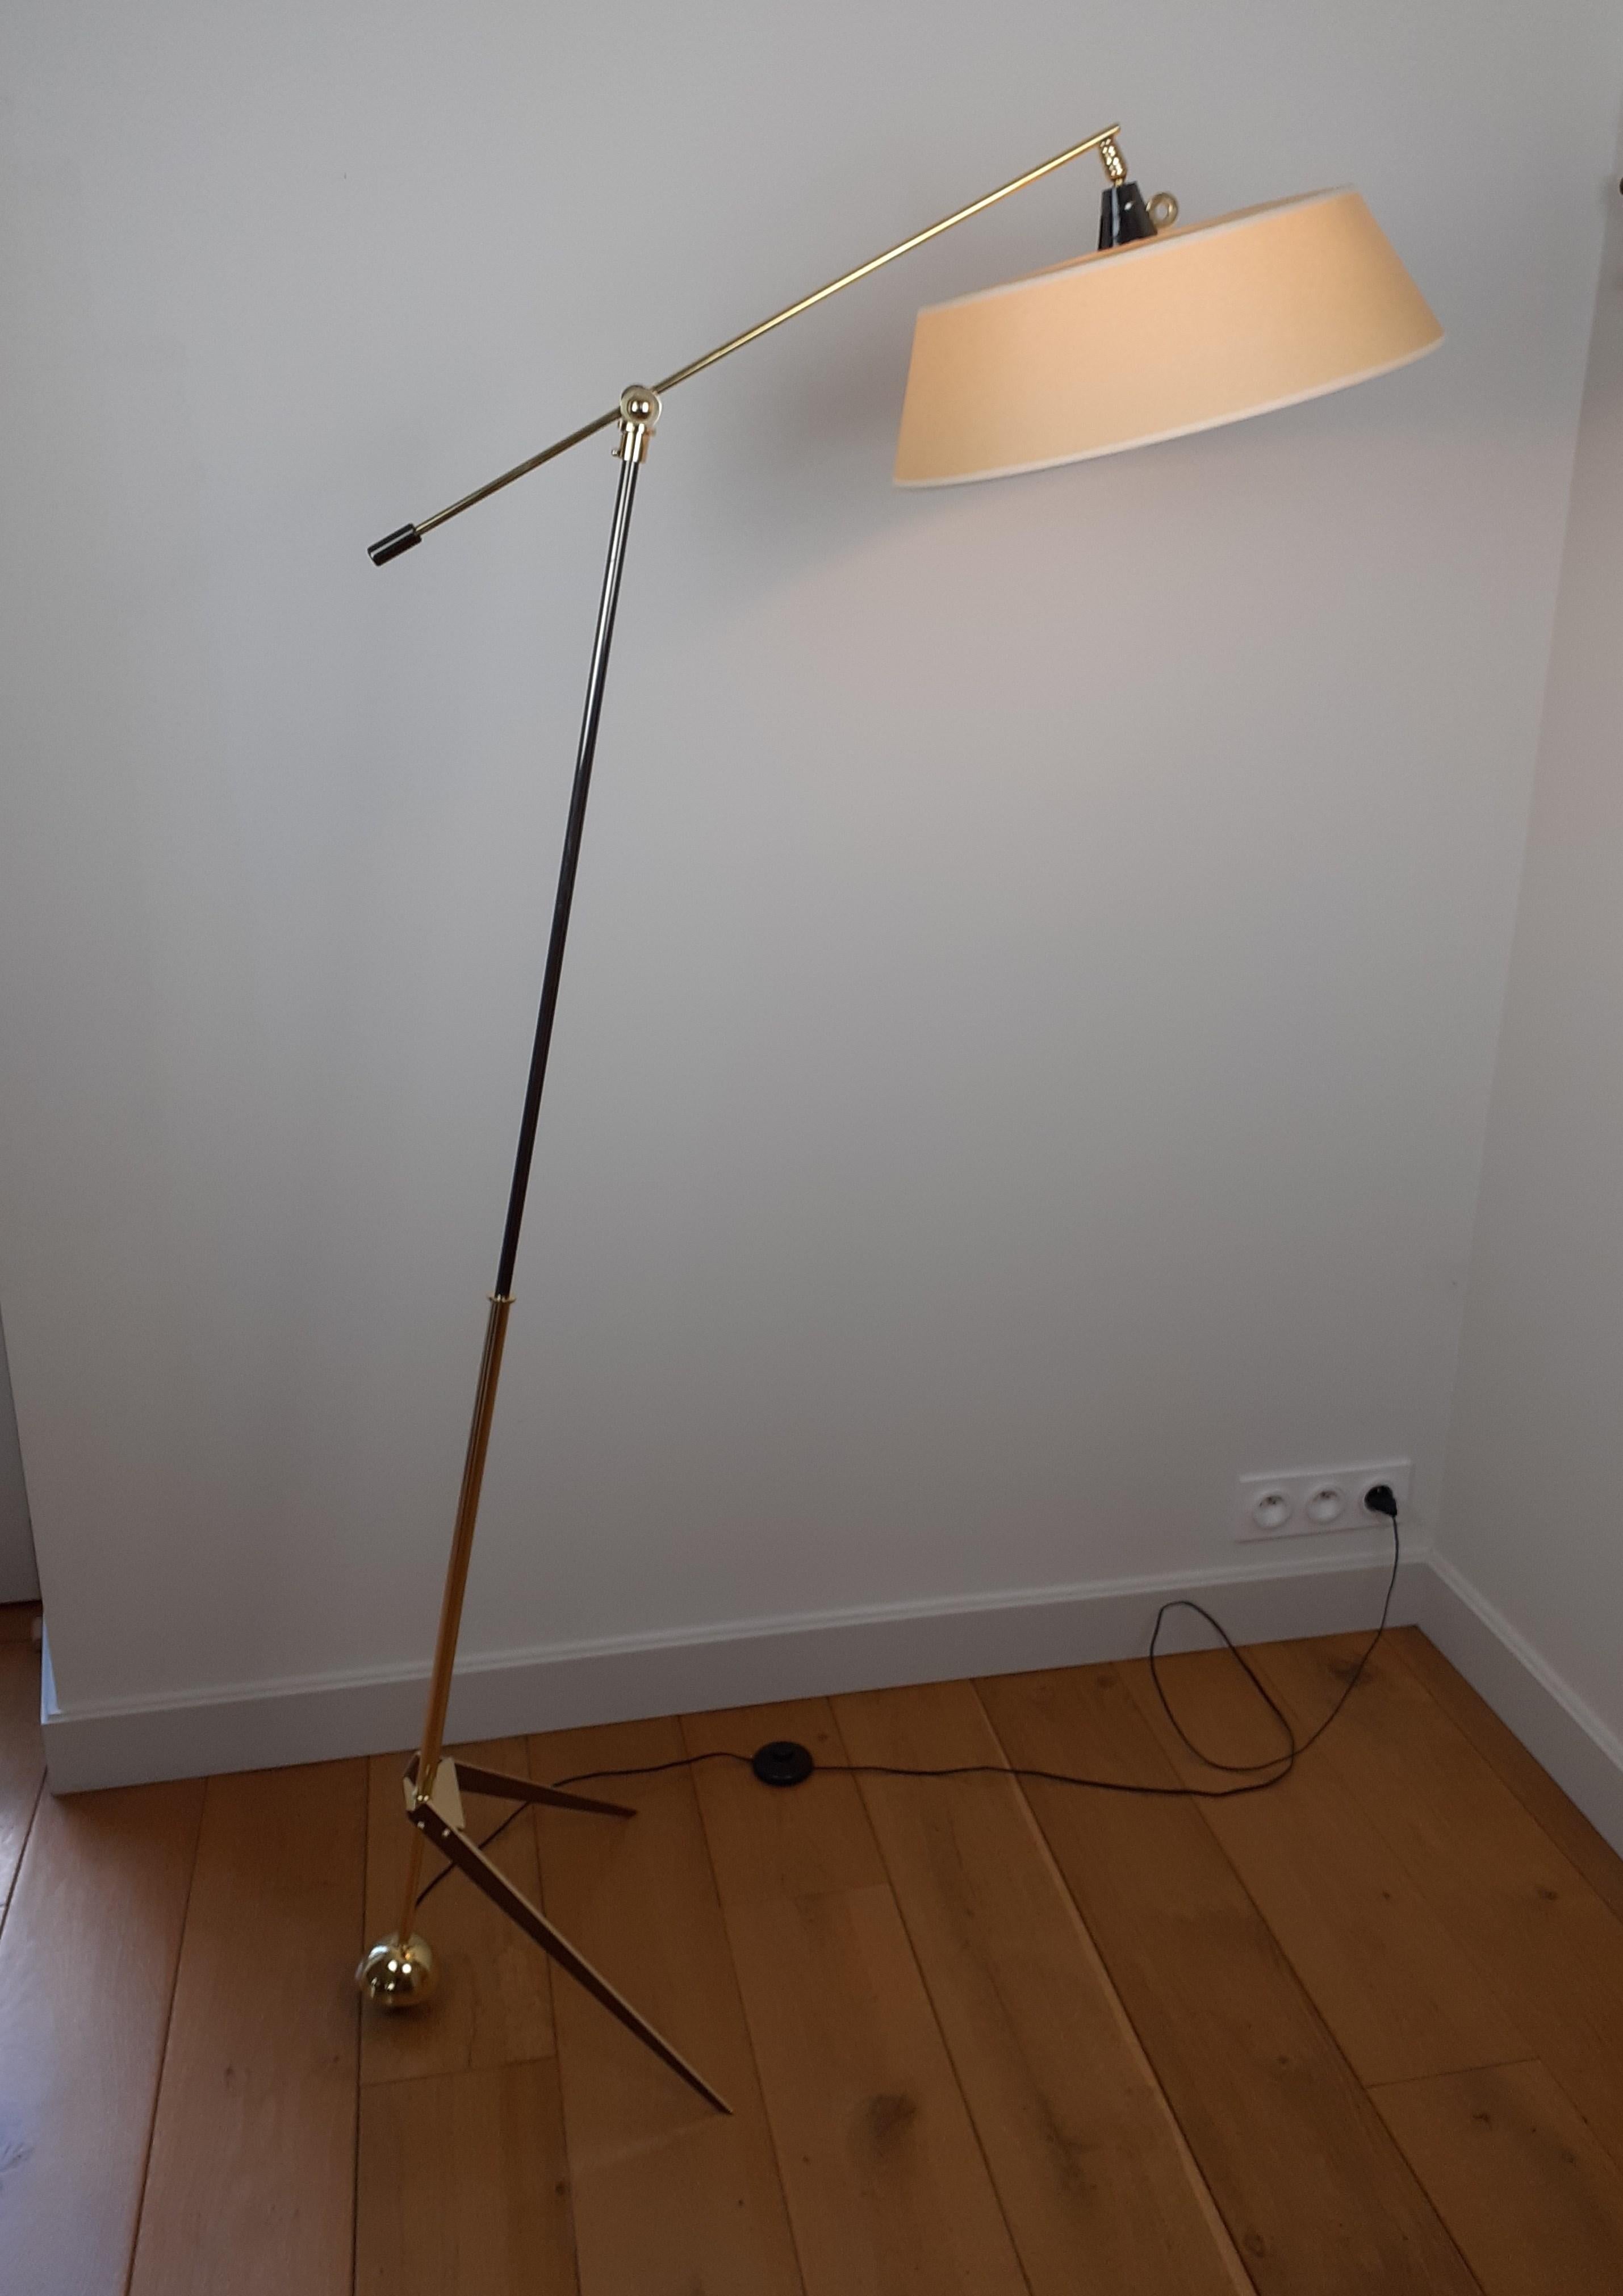 Floor lamp with pendulum and ball joint in brass with gunmetal patina, composed of a compass foot in brass and gunmetal patina. A ball joint is used to tilt the arm of light.
A round and slightly conical lampshade oriented by a brass ball joint is